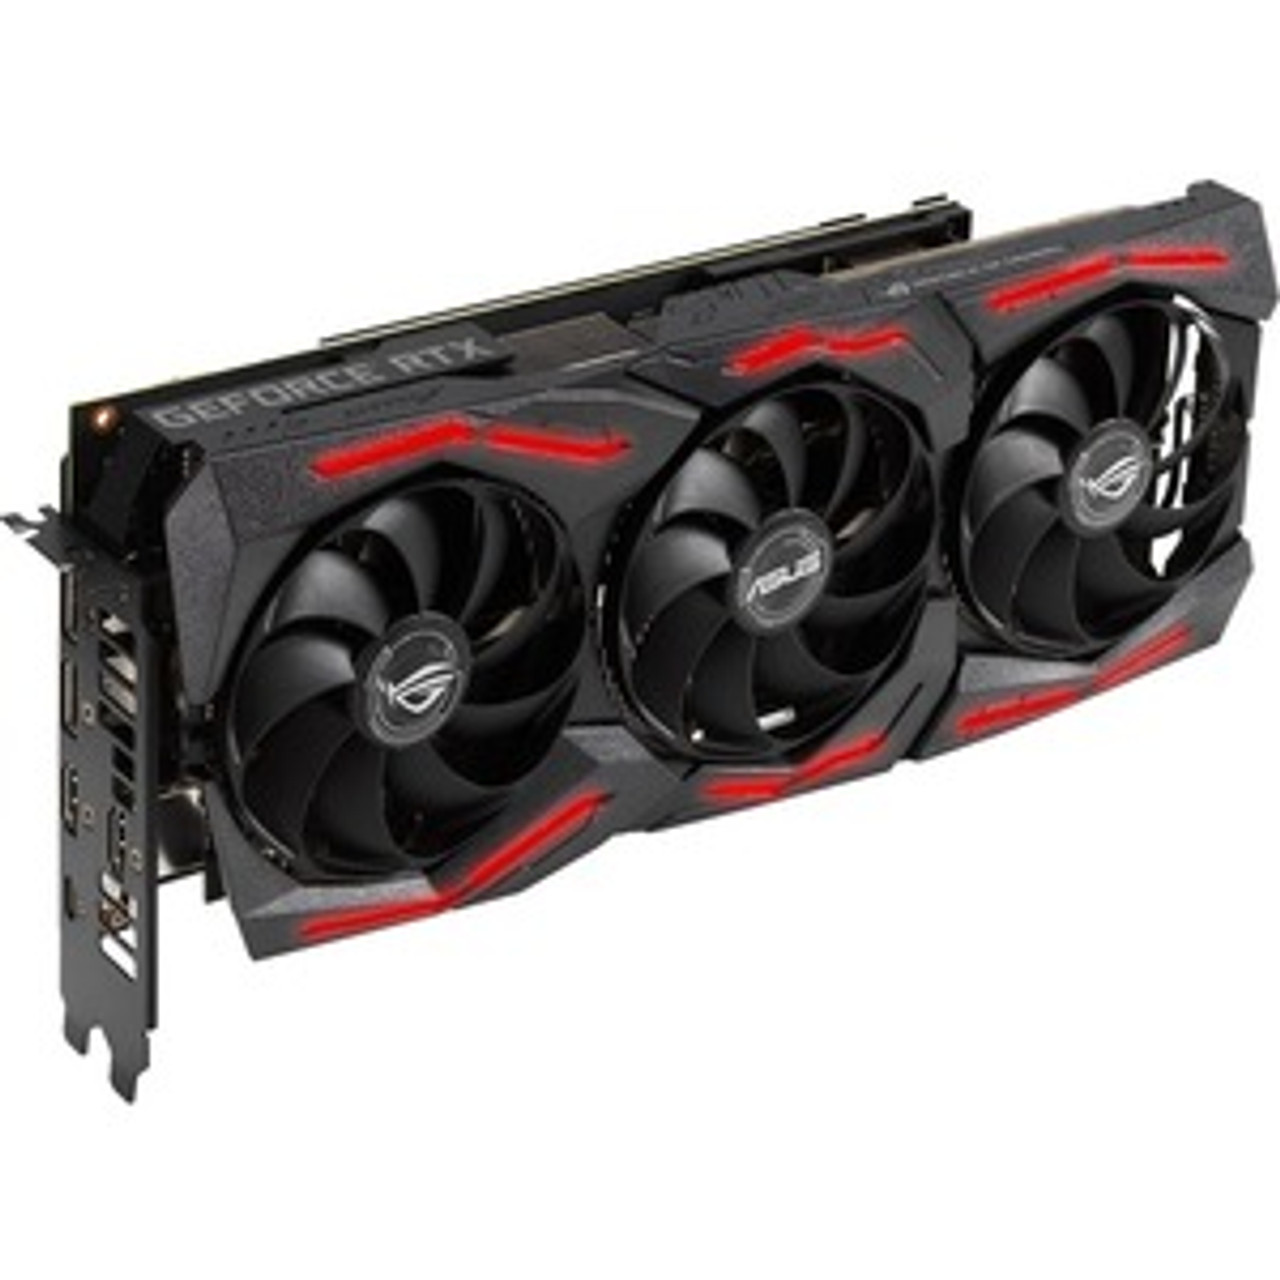 90YV0DQ1-M0AA00 Asus ROG NVIDIA GeForce 2060 Graphic Card